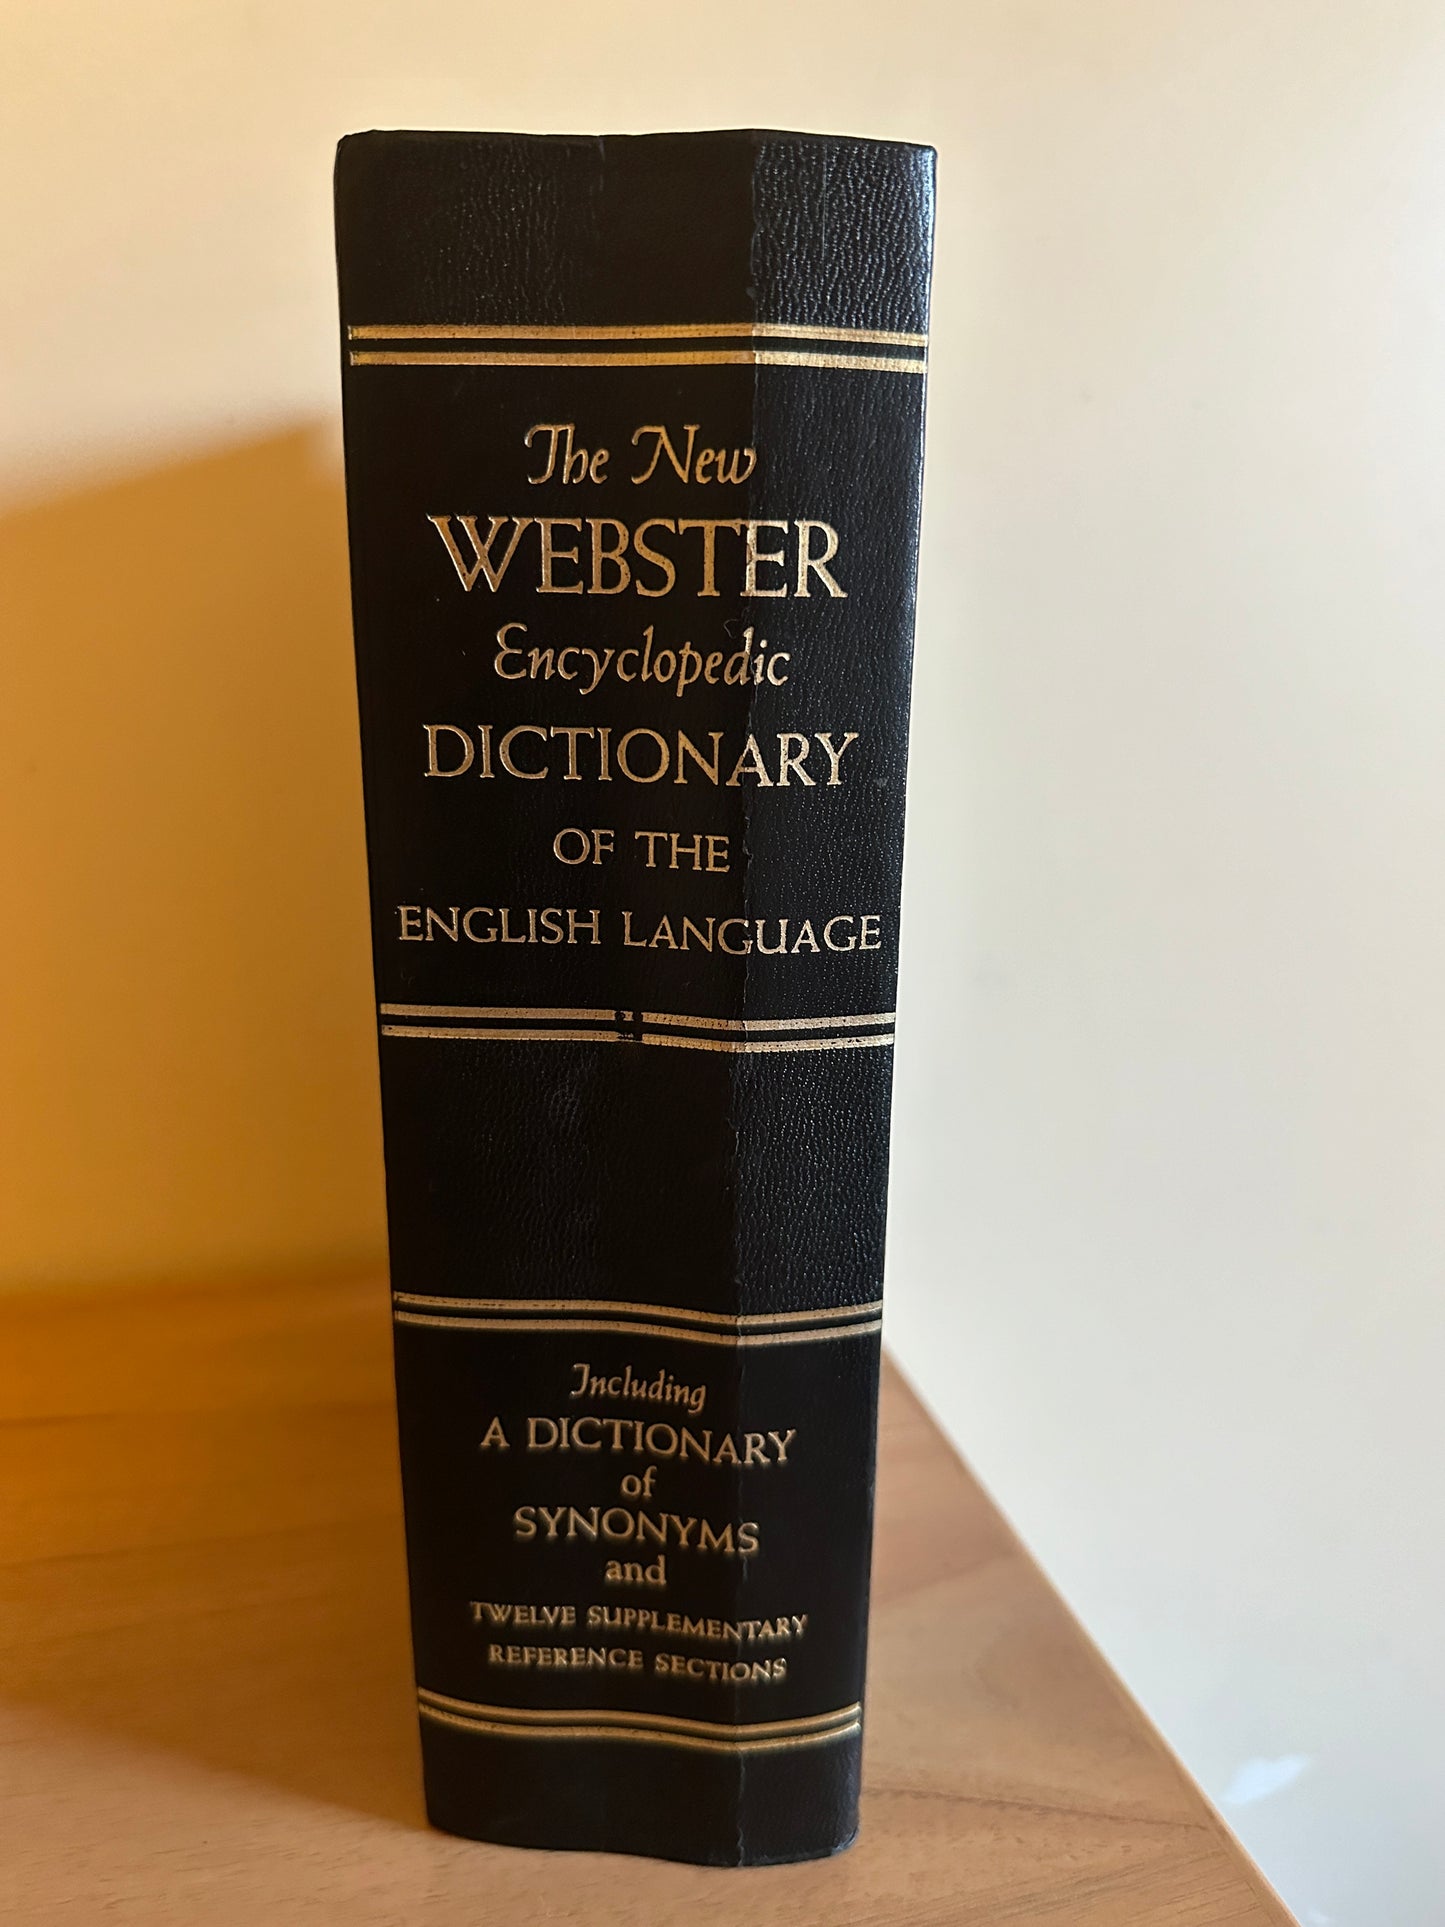 1970 Webster Dictionary of the English Language